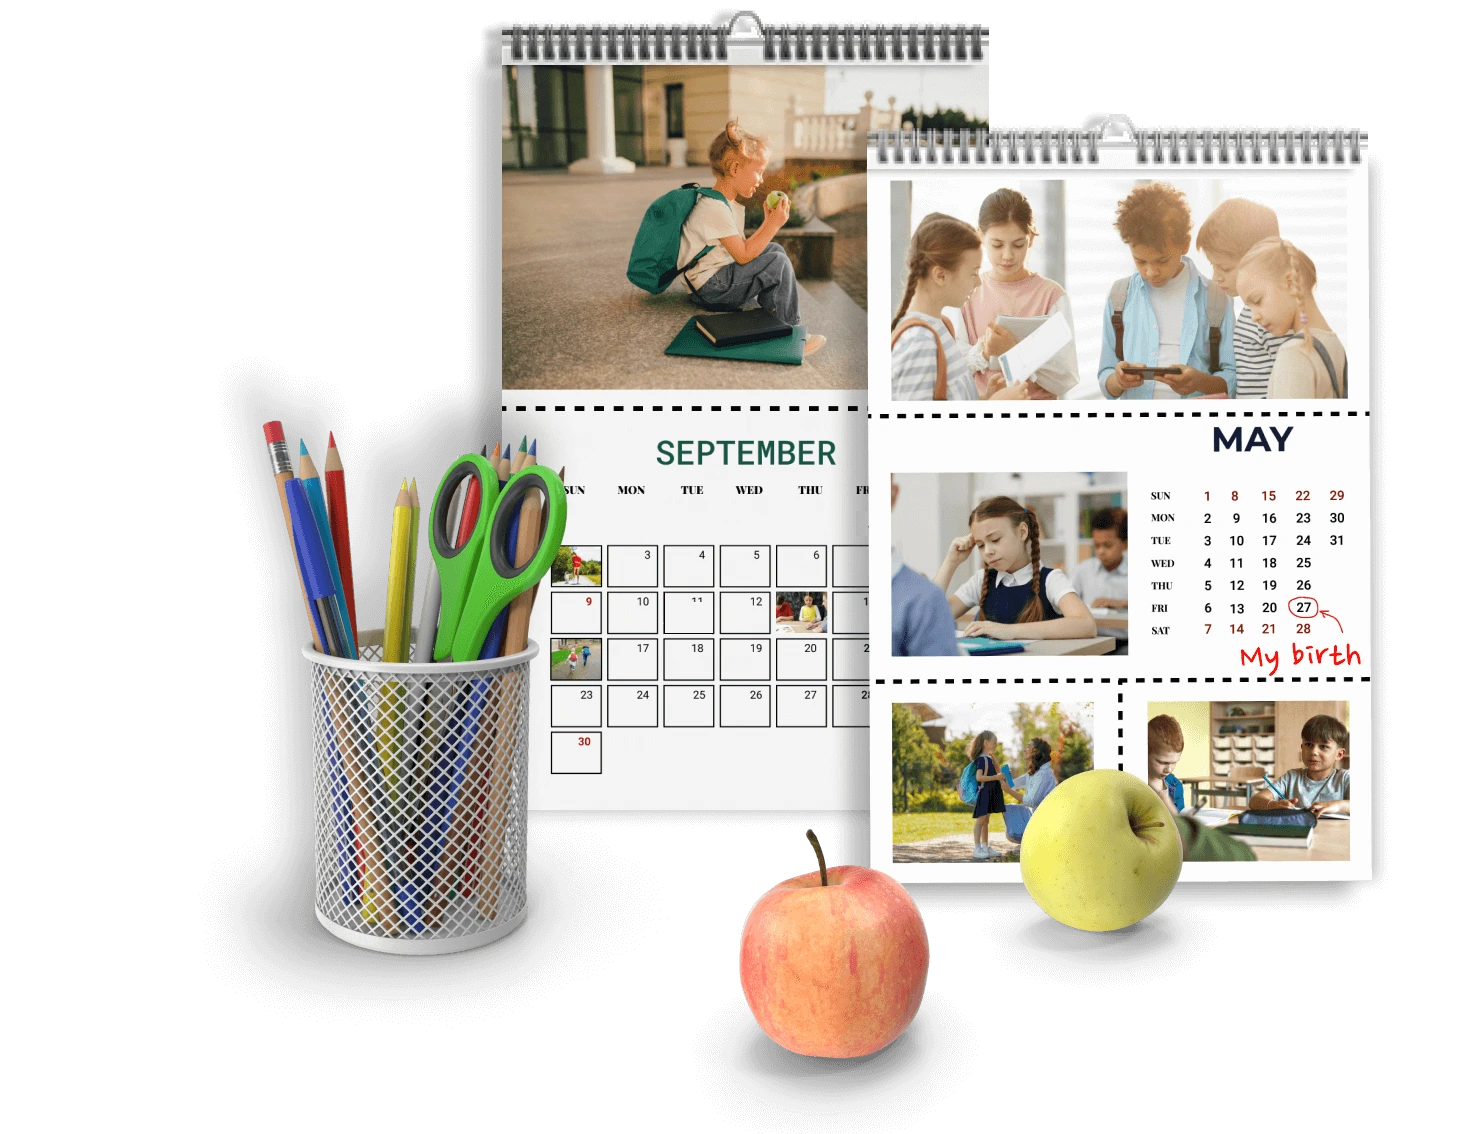 Want to design your own school calendar?